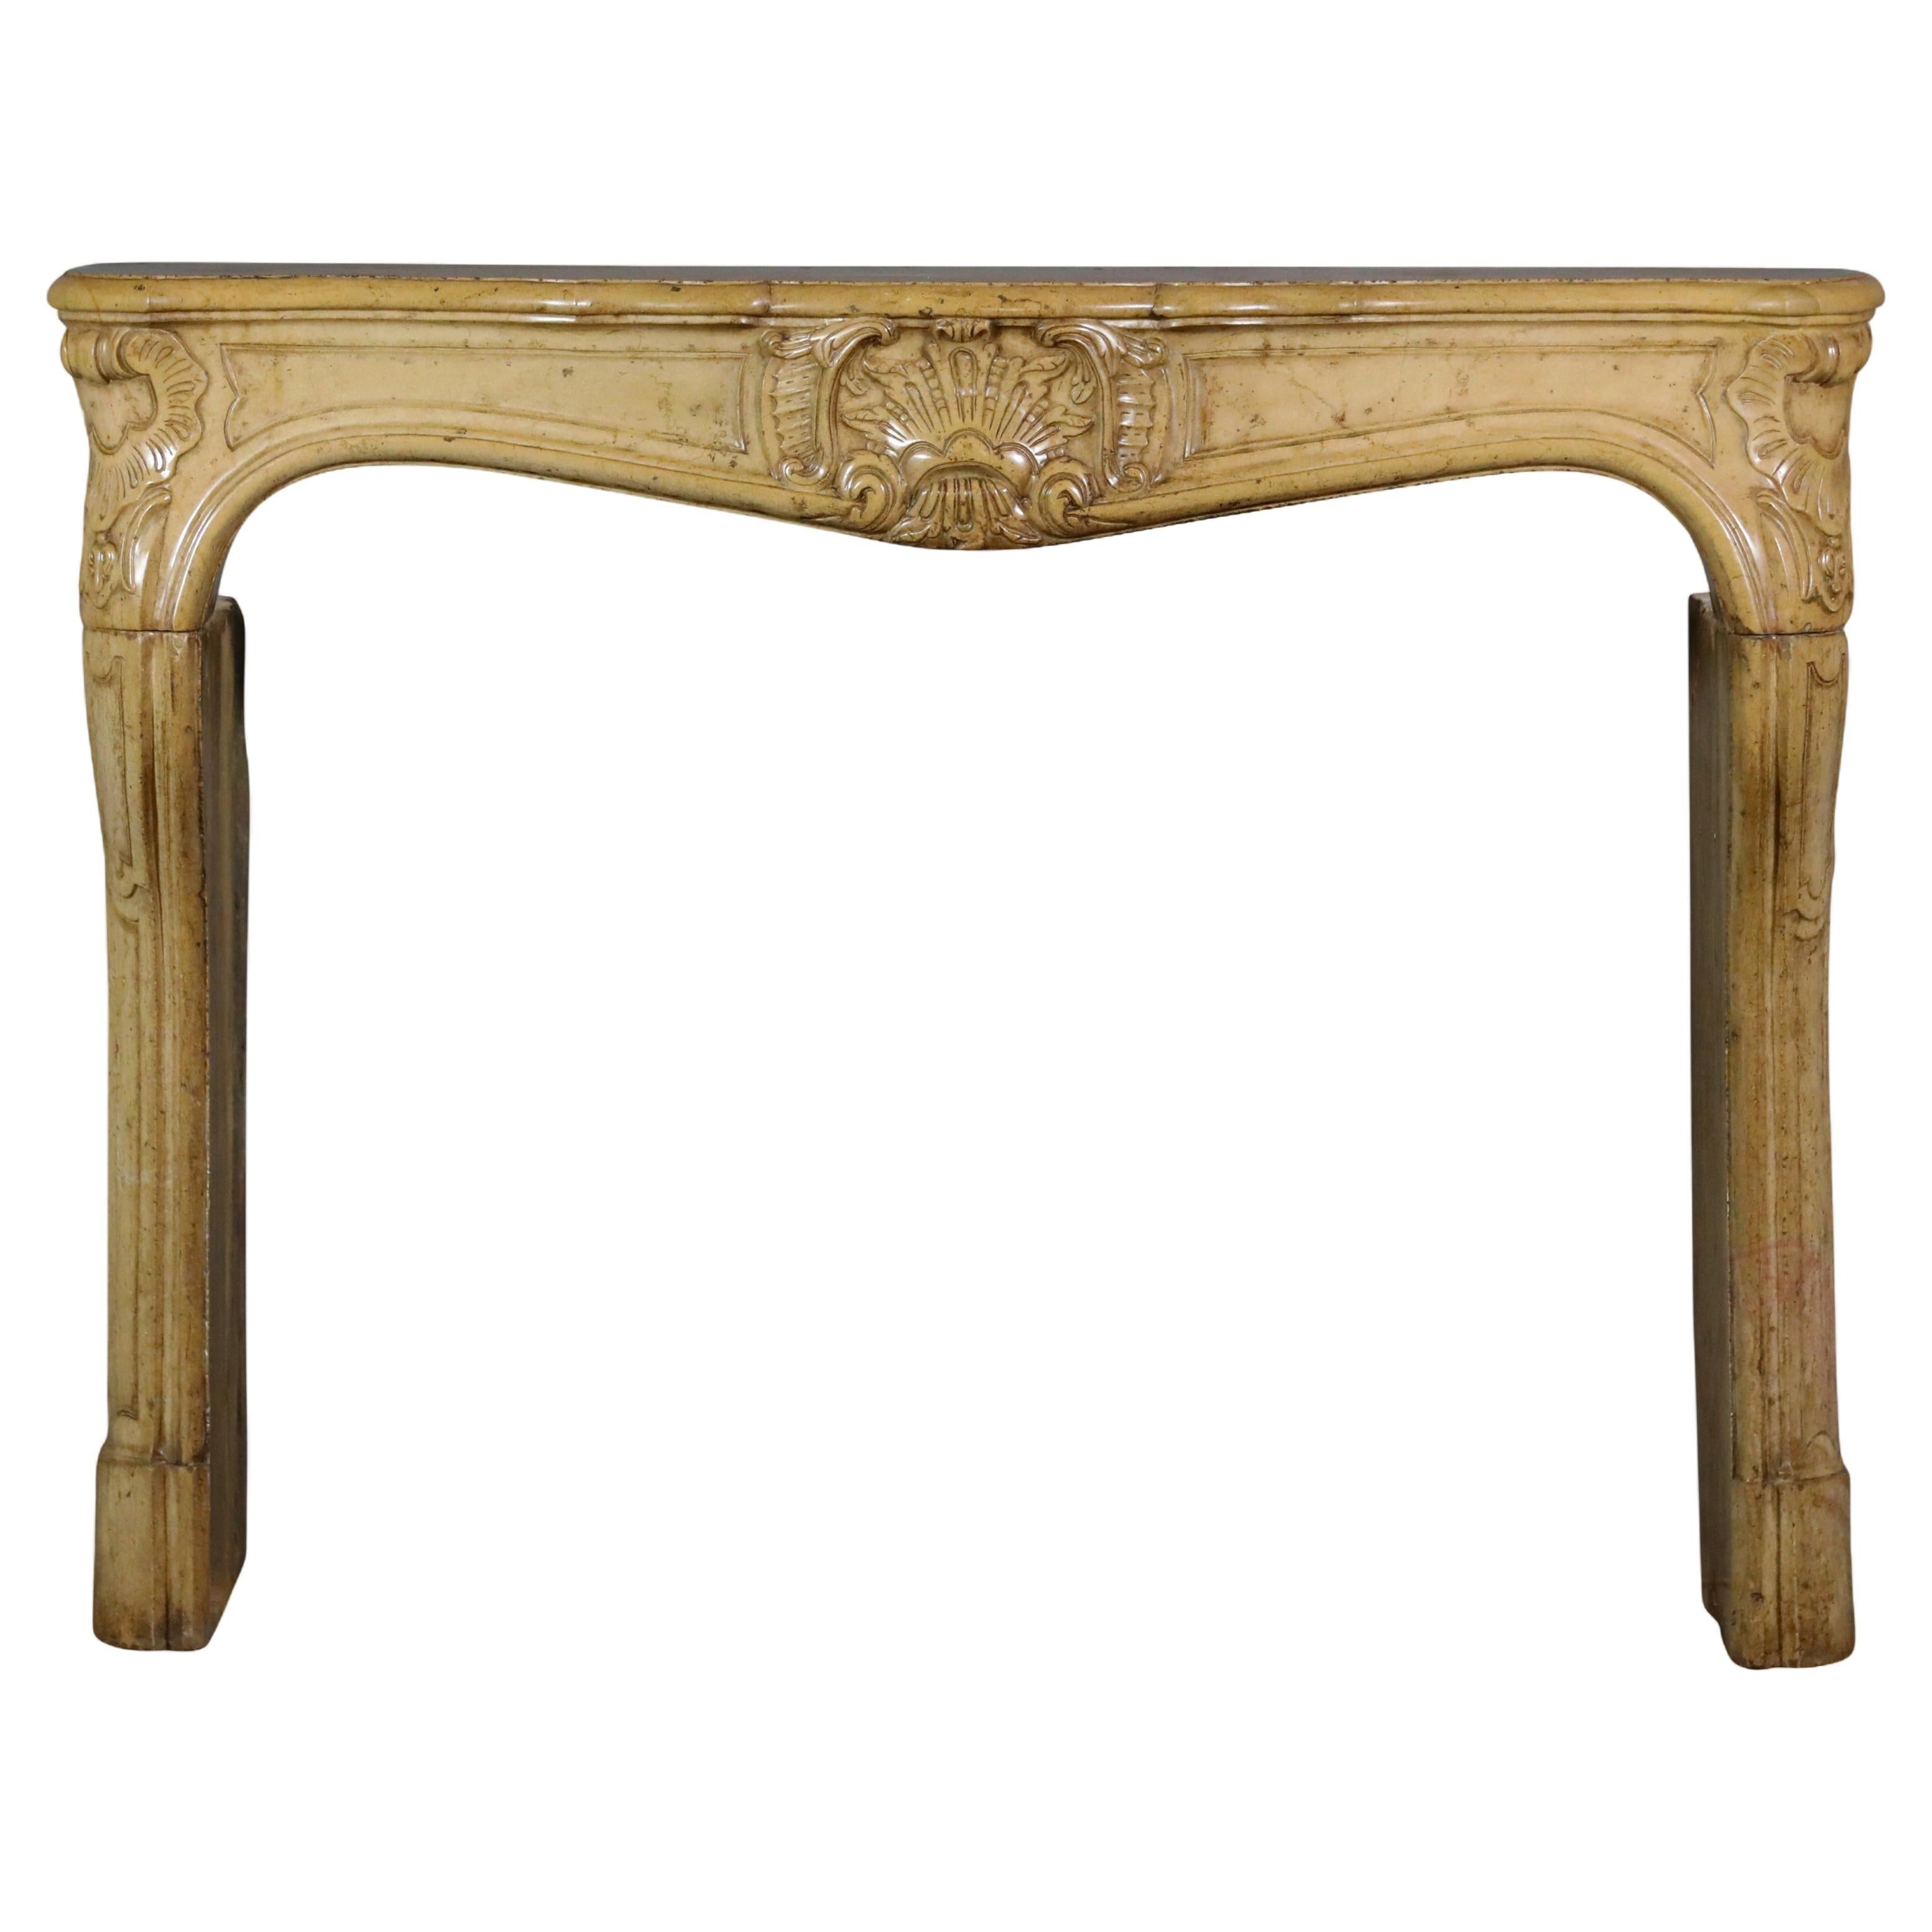 Classic Regency Fireplace Surround In French Honey Color Hard Stone 18th Century